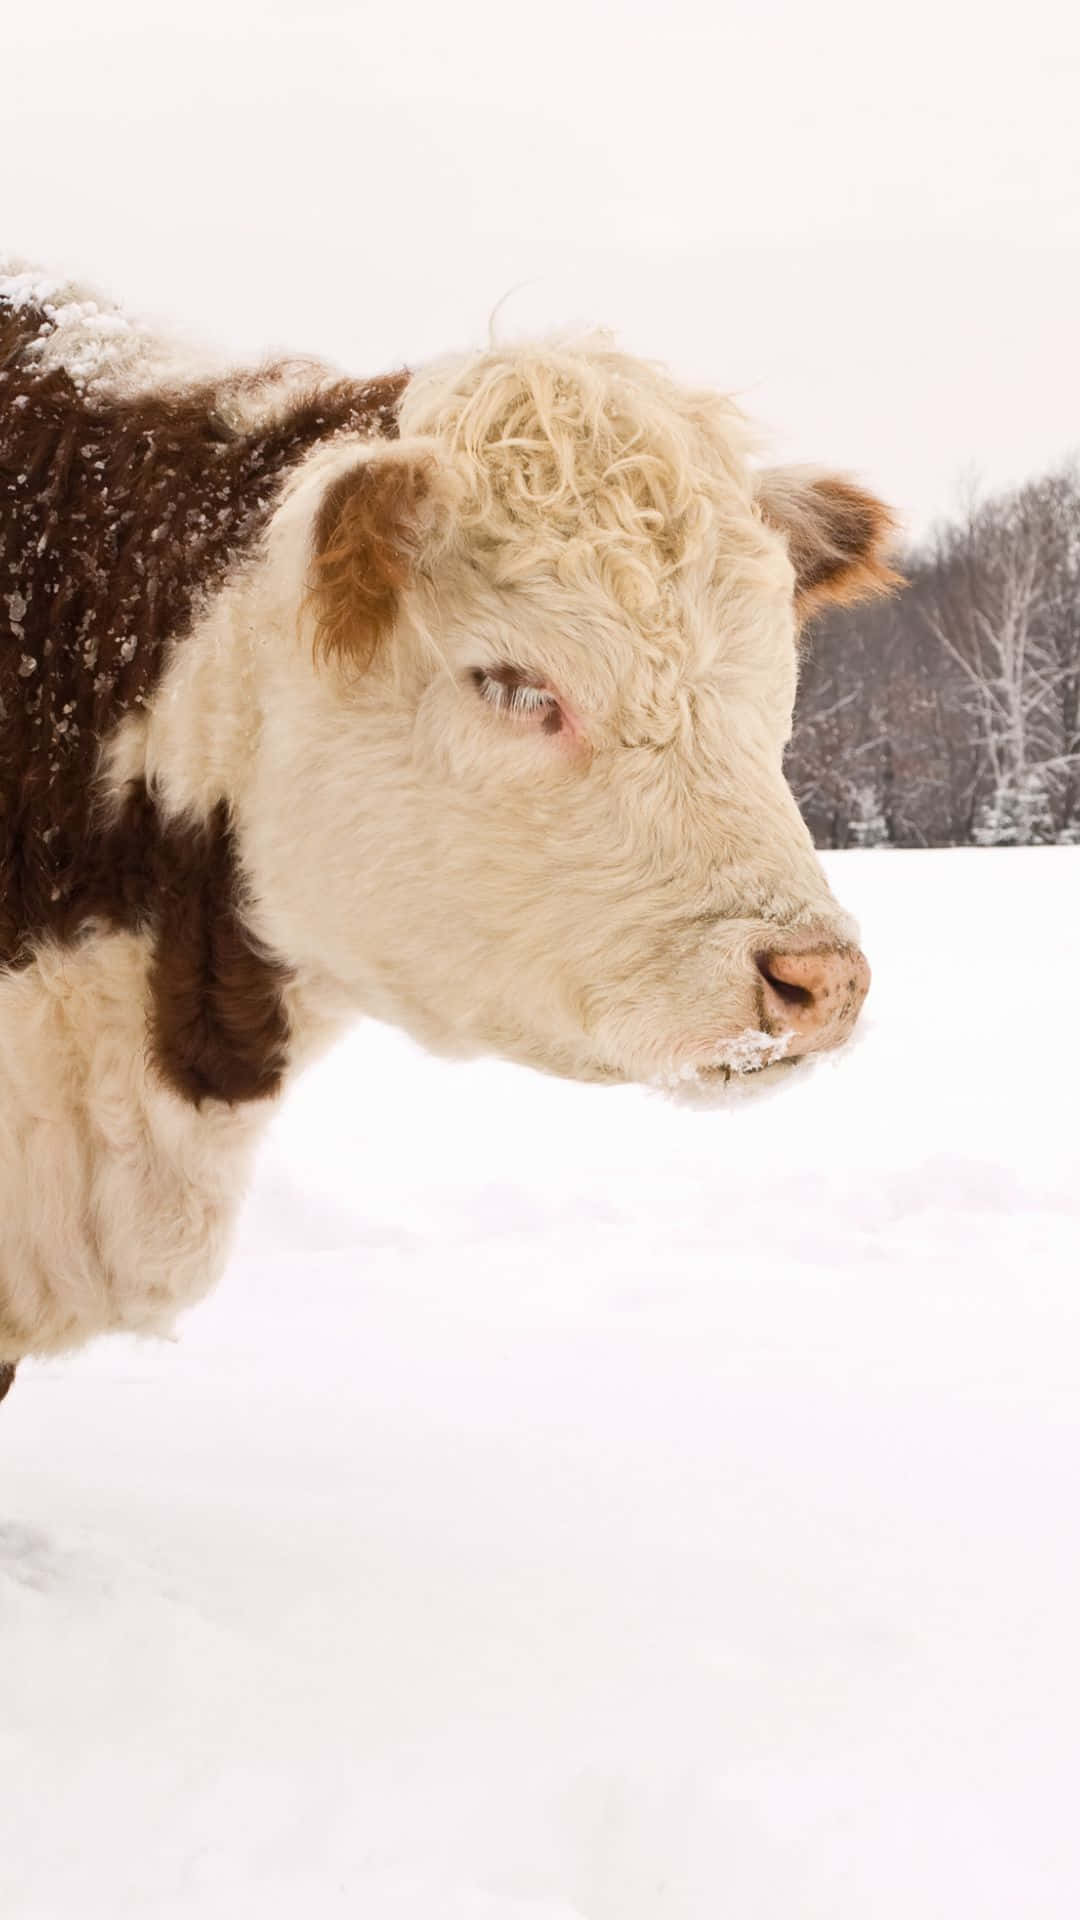 A Cow Standing In The Snow